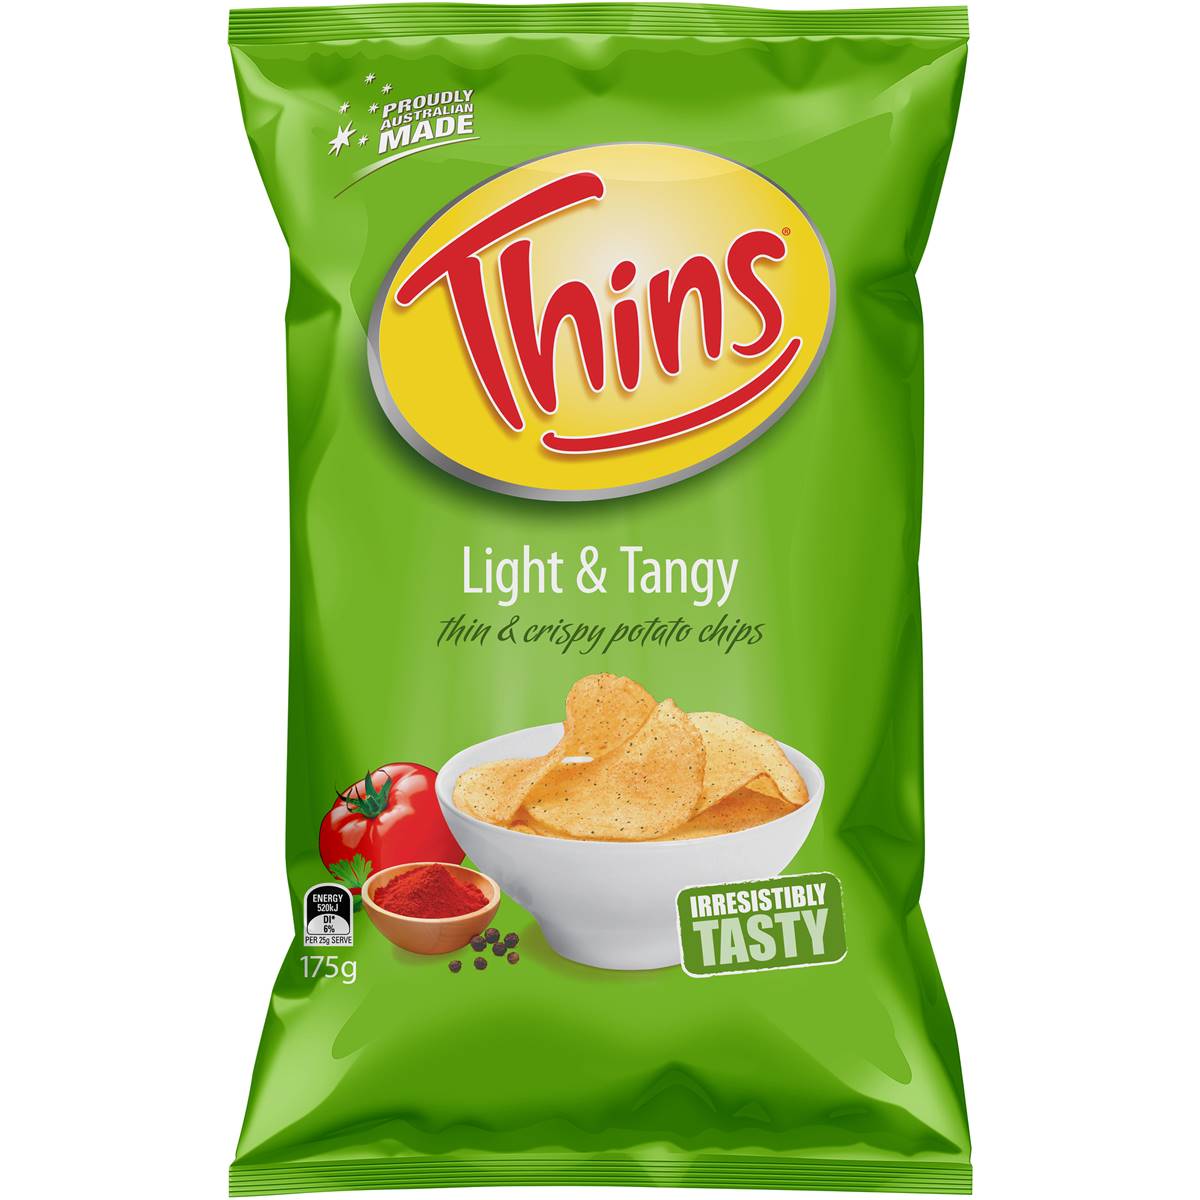 Calories in Thins Chips Light & Tangy